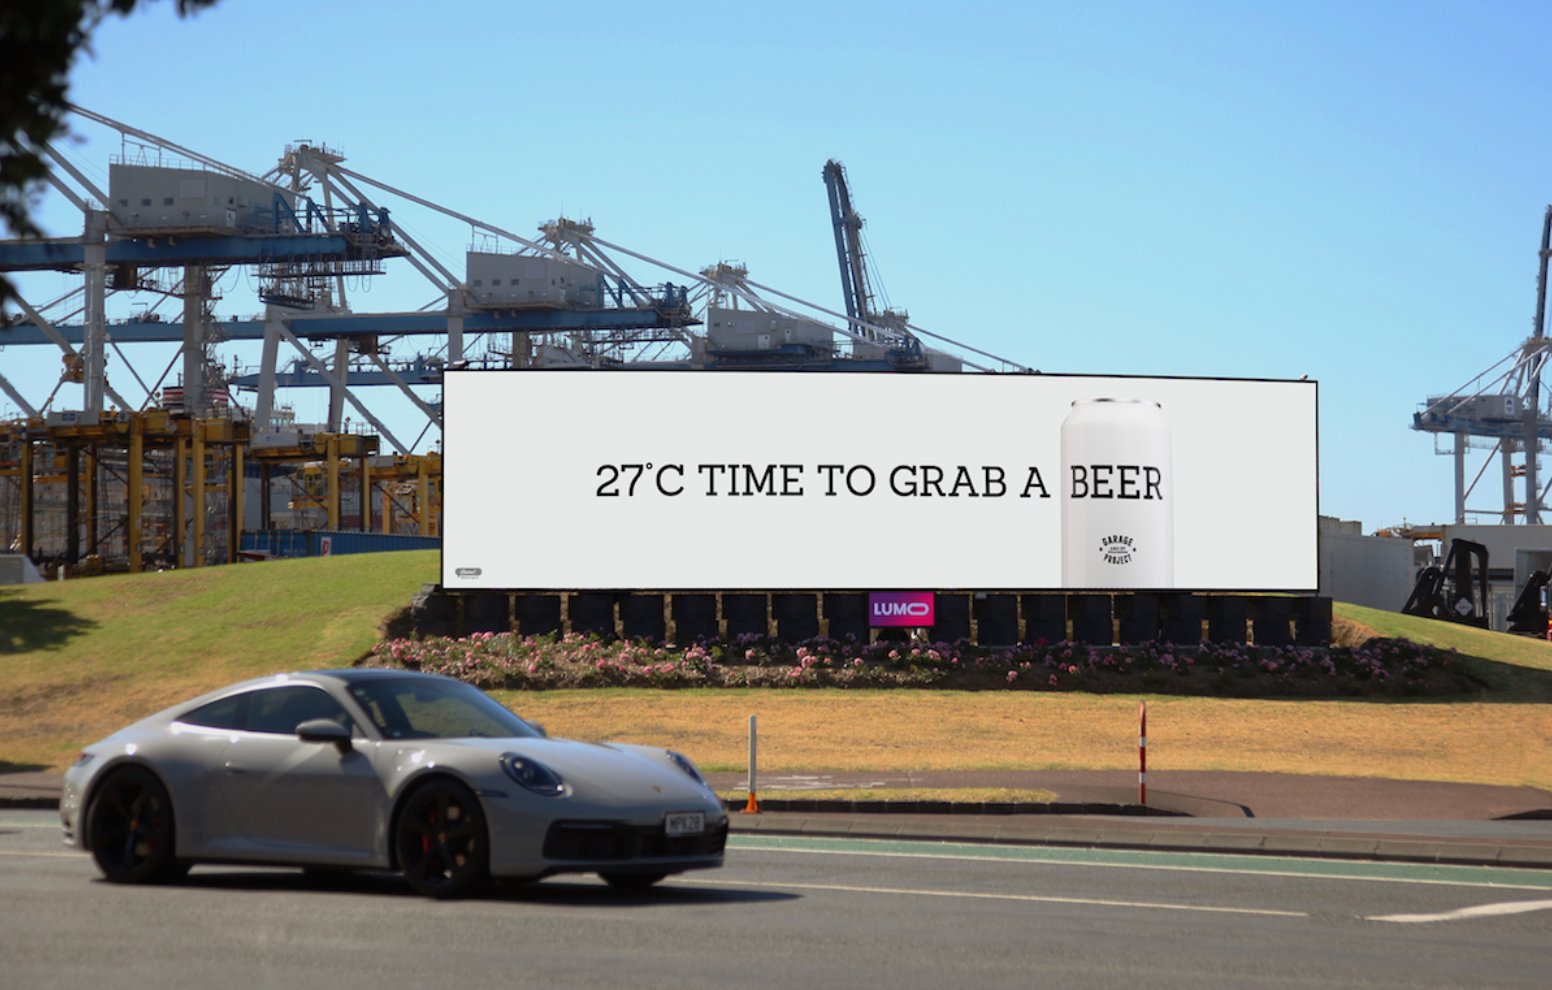 Beer ad ideas: 5 examples from (craft) beer companies